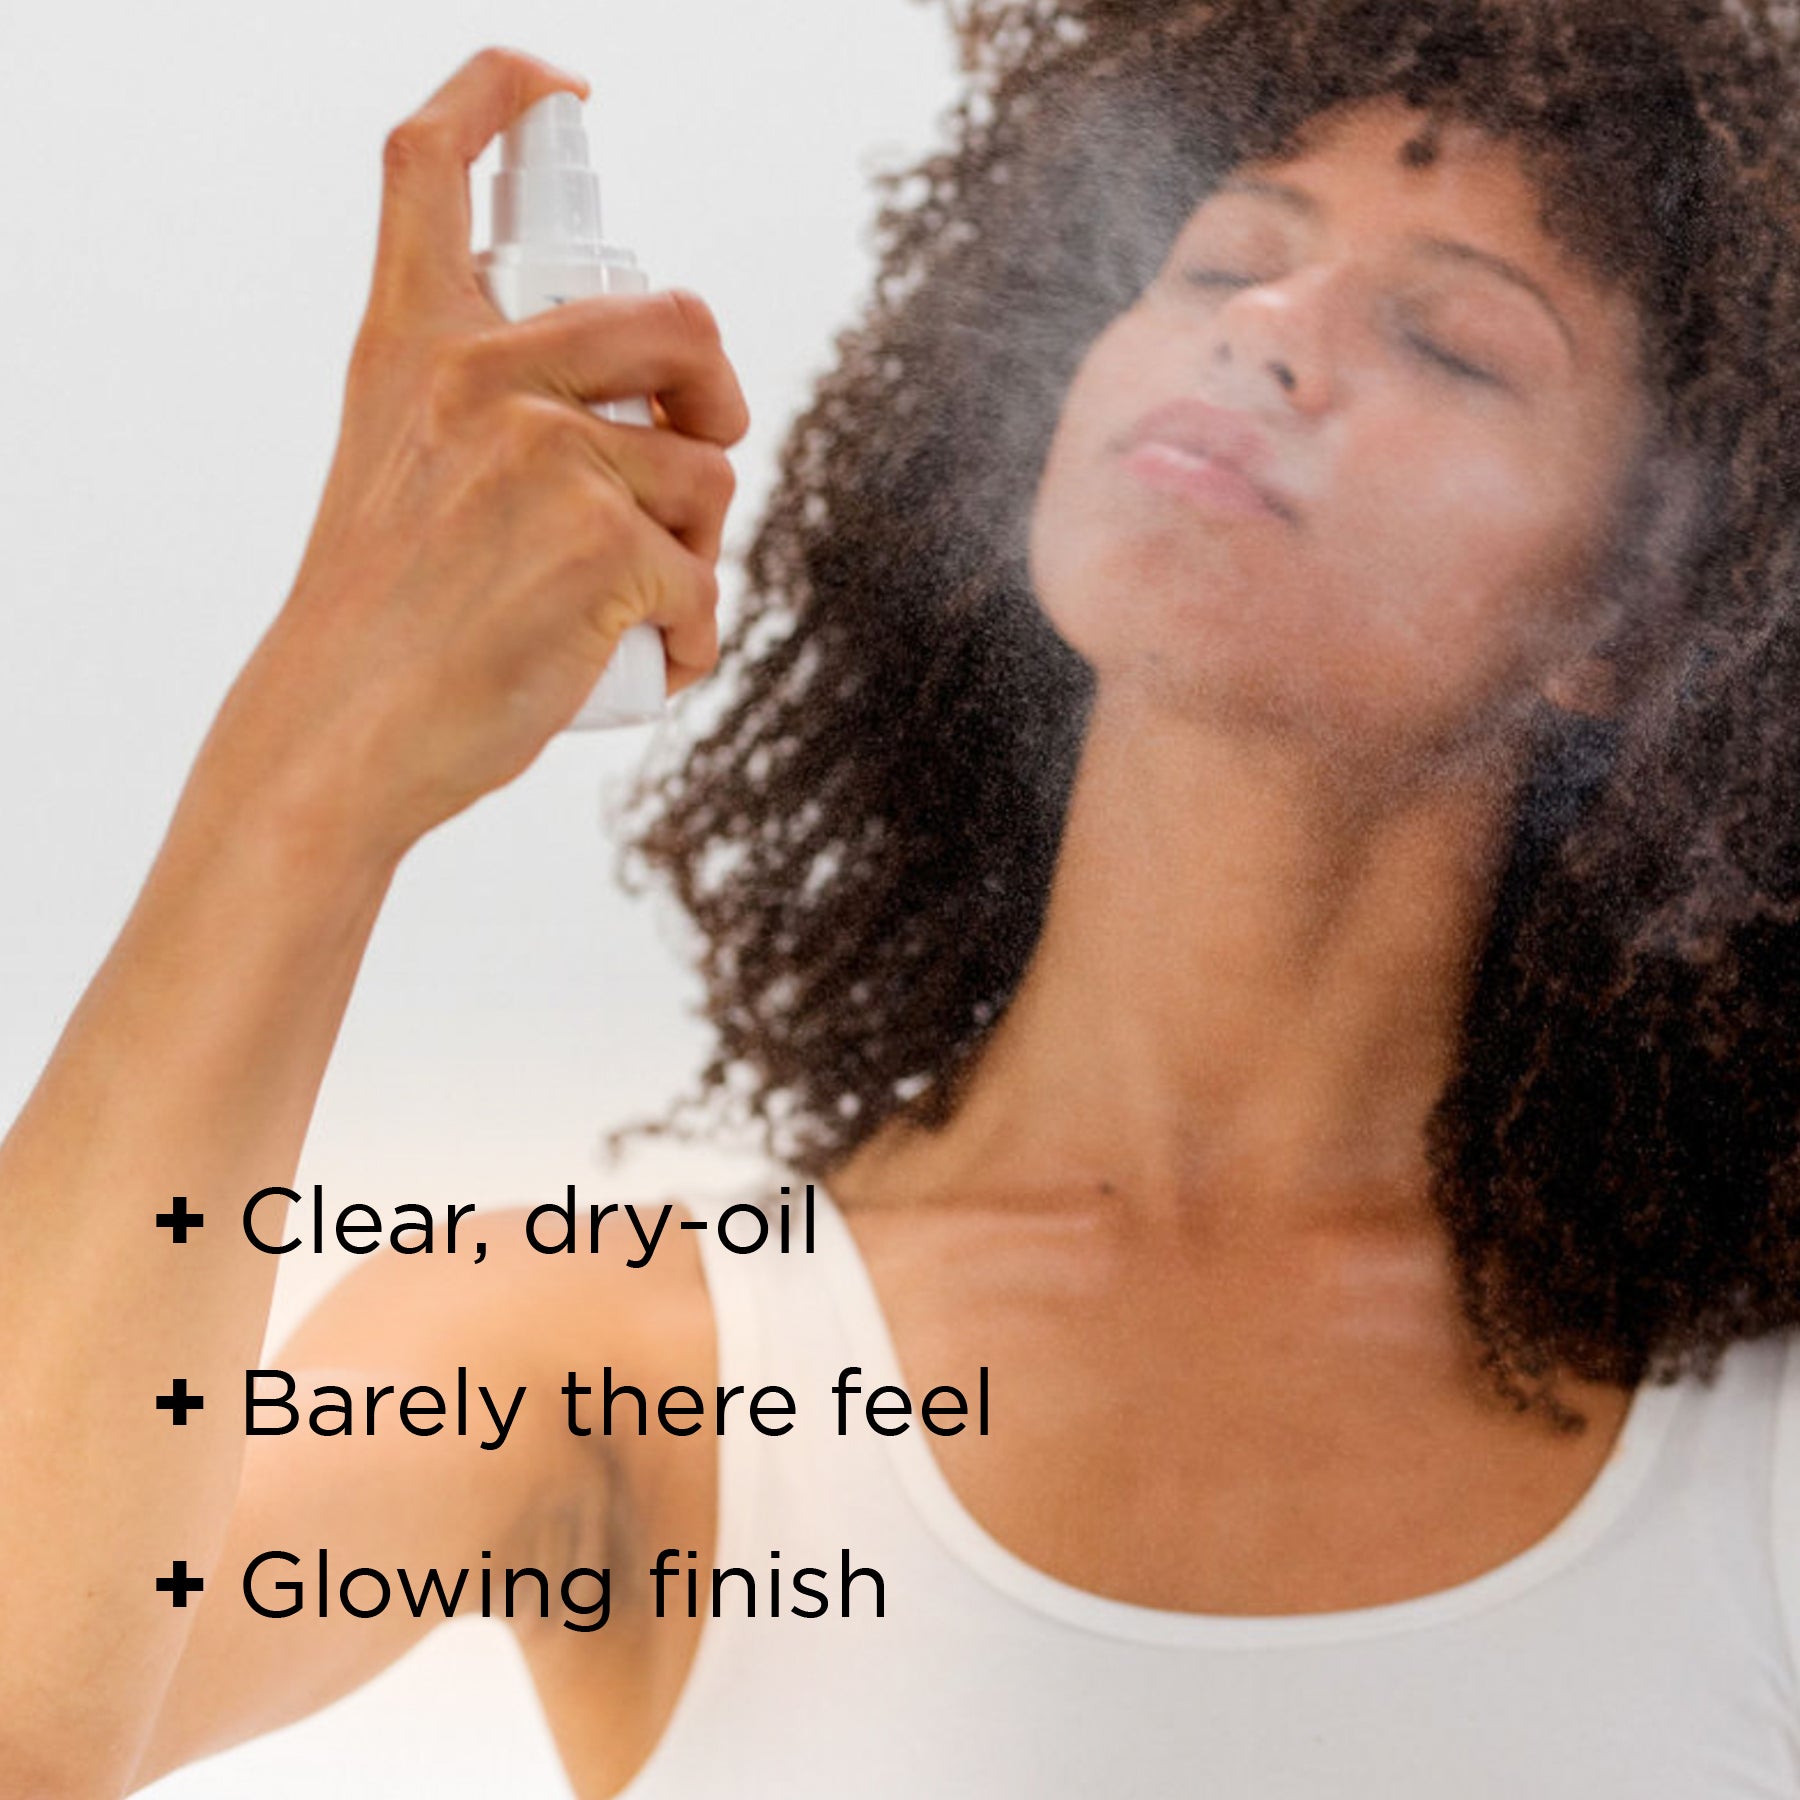 DAILY PREVENTION™ protect and refresh mist SPF 40